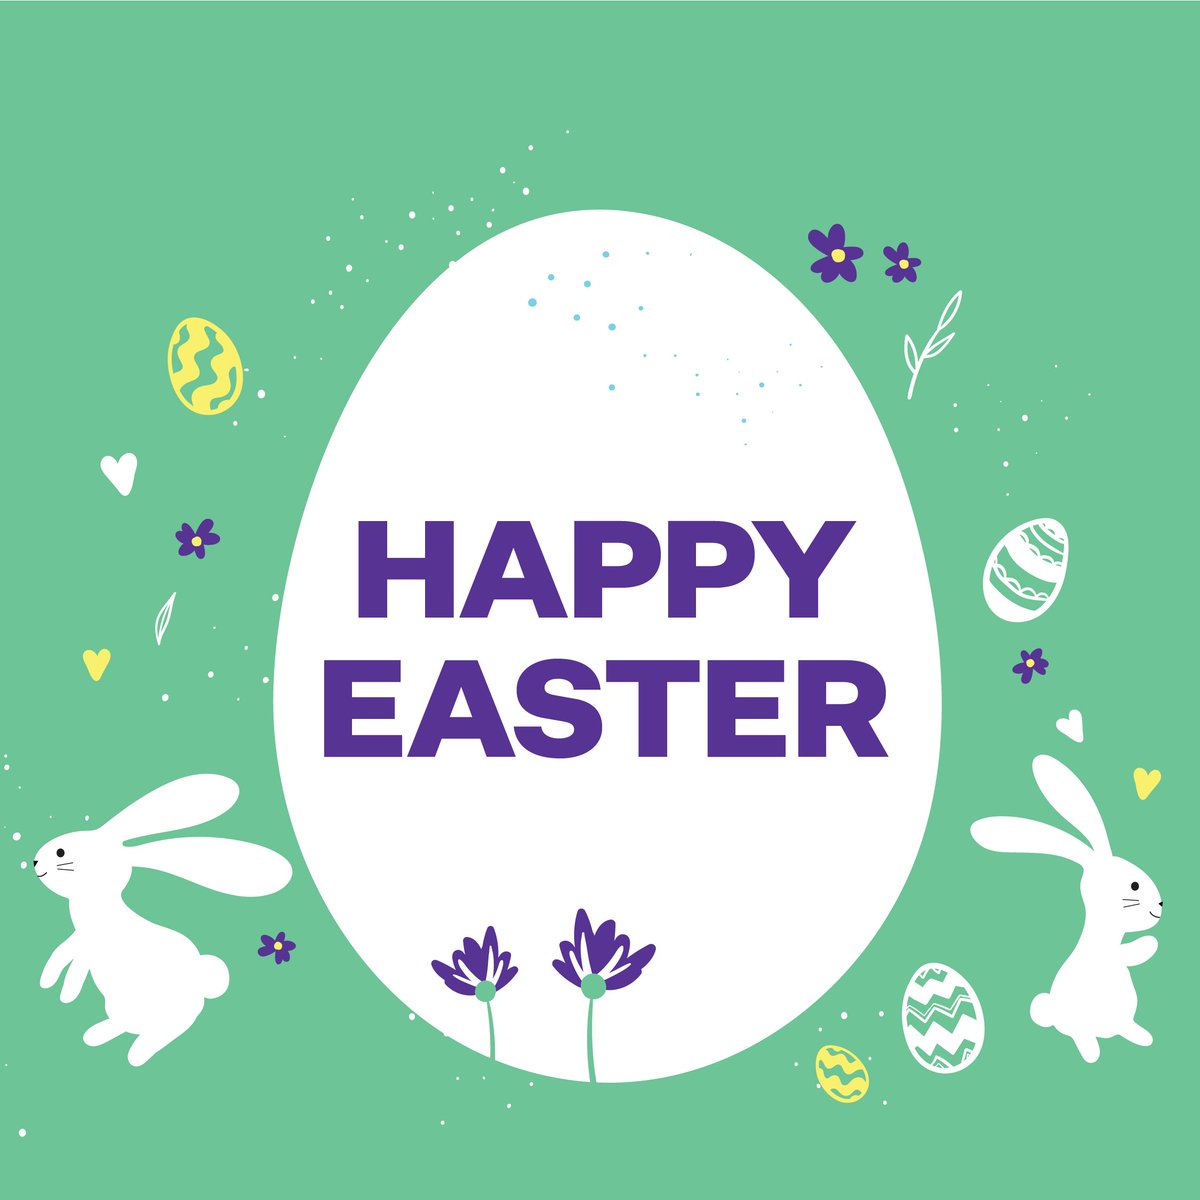 Wishing everyone a joyful Easter! May your day be filled with happiness and blessings 🌼🐰 #EasterGreetings #Easter2024